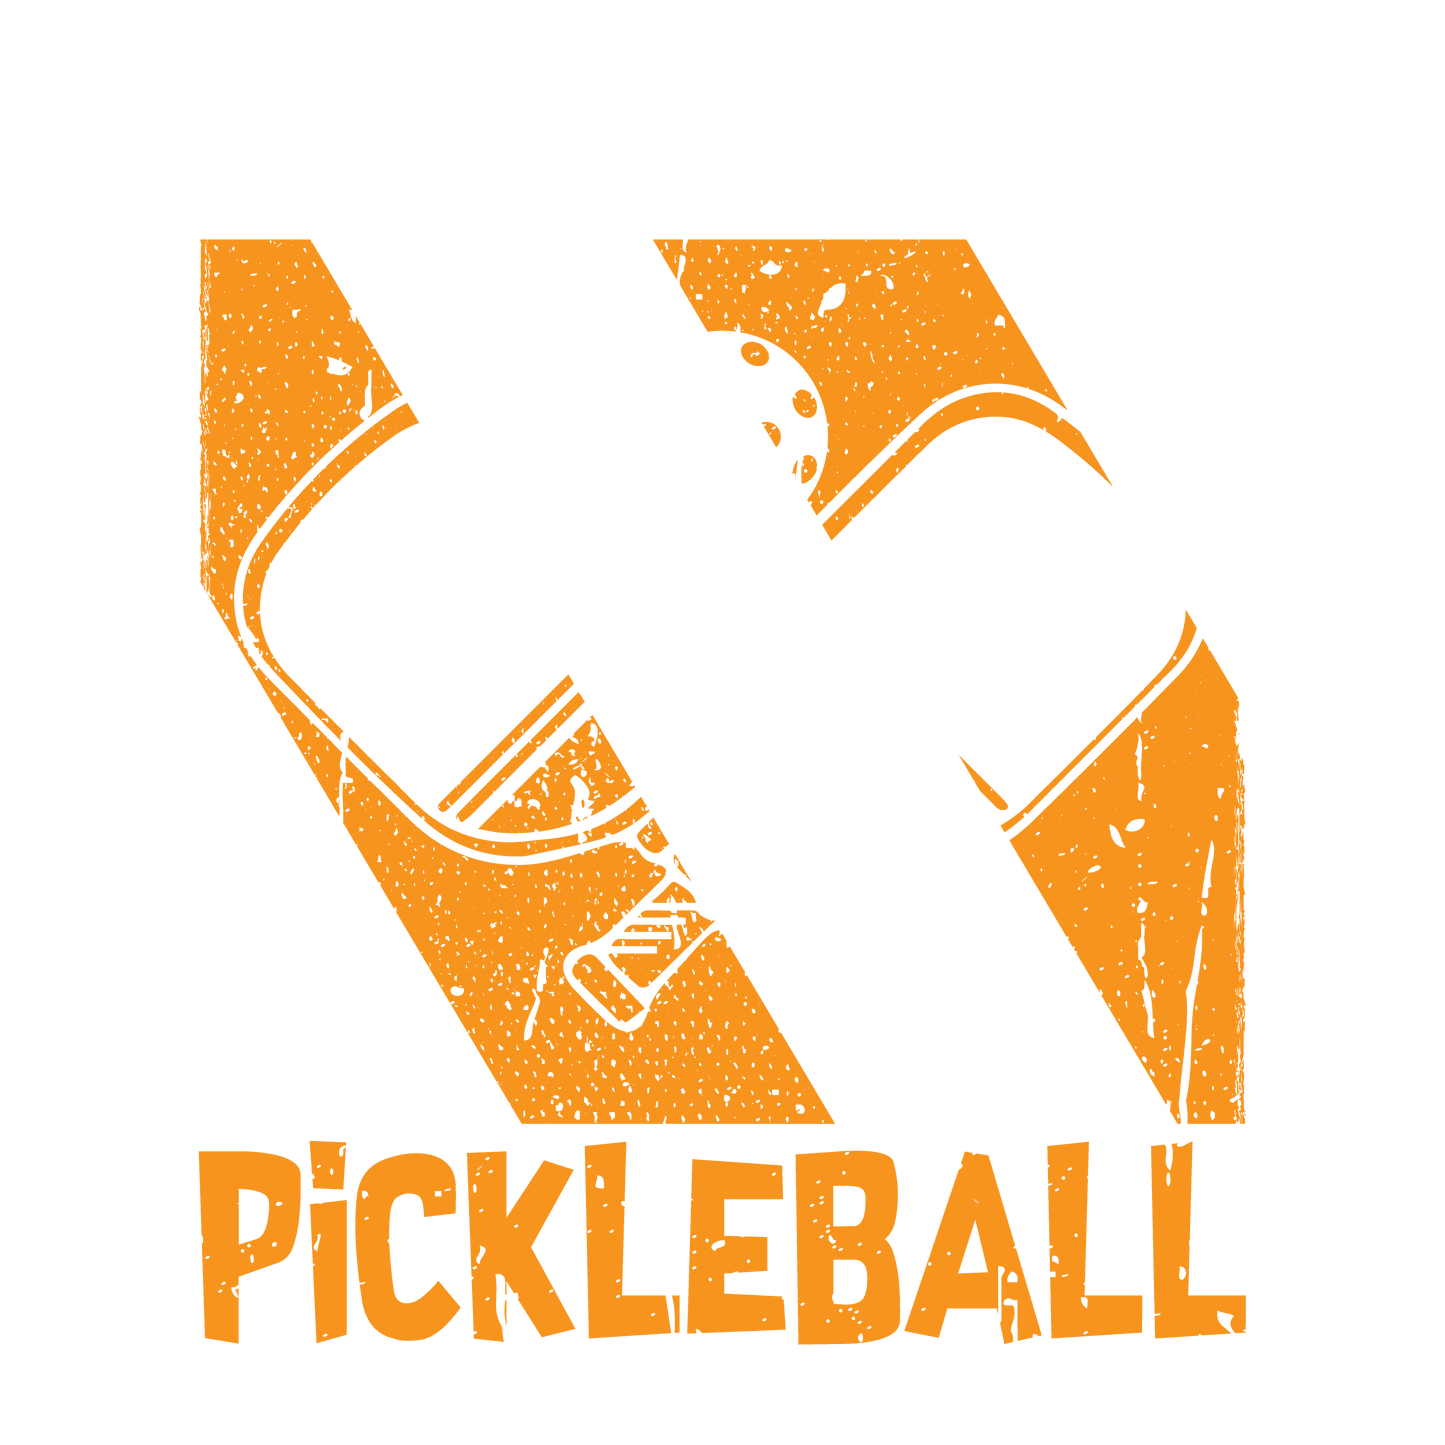 Ask me about my PickleBall T Shirt